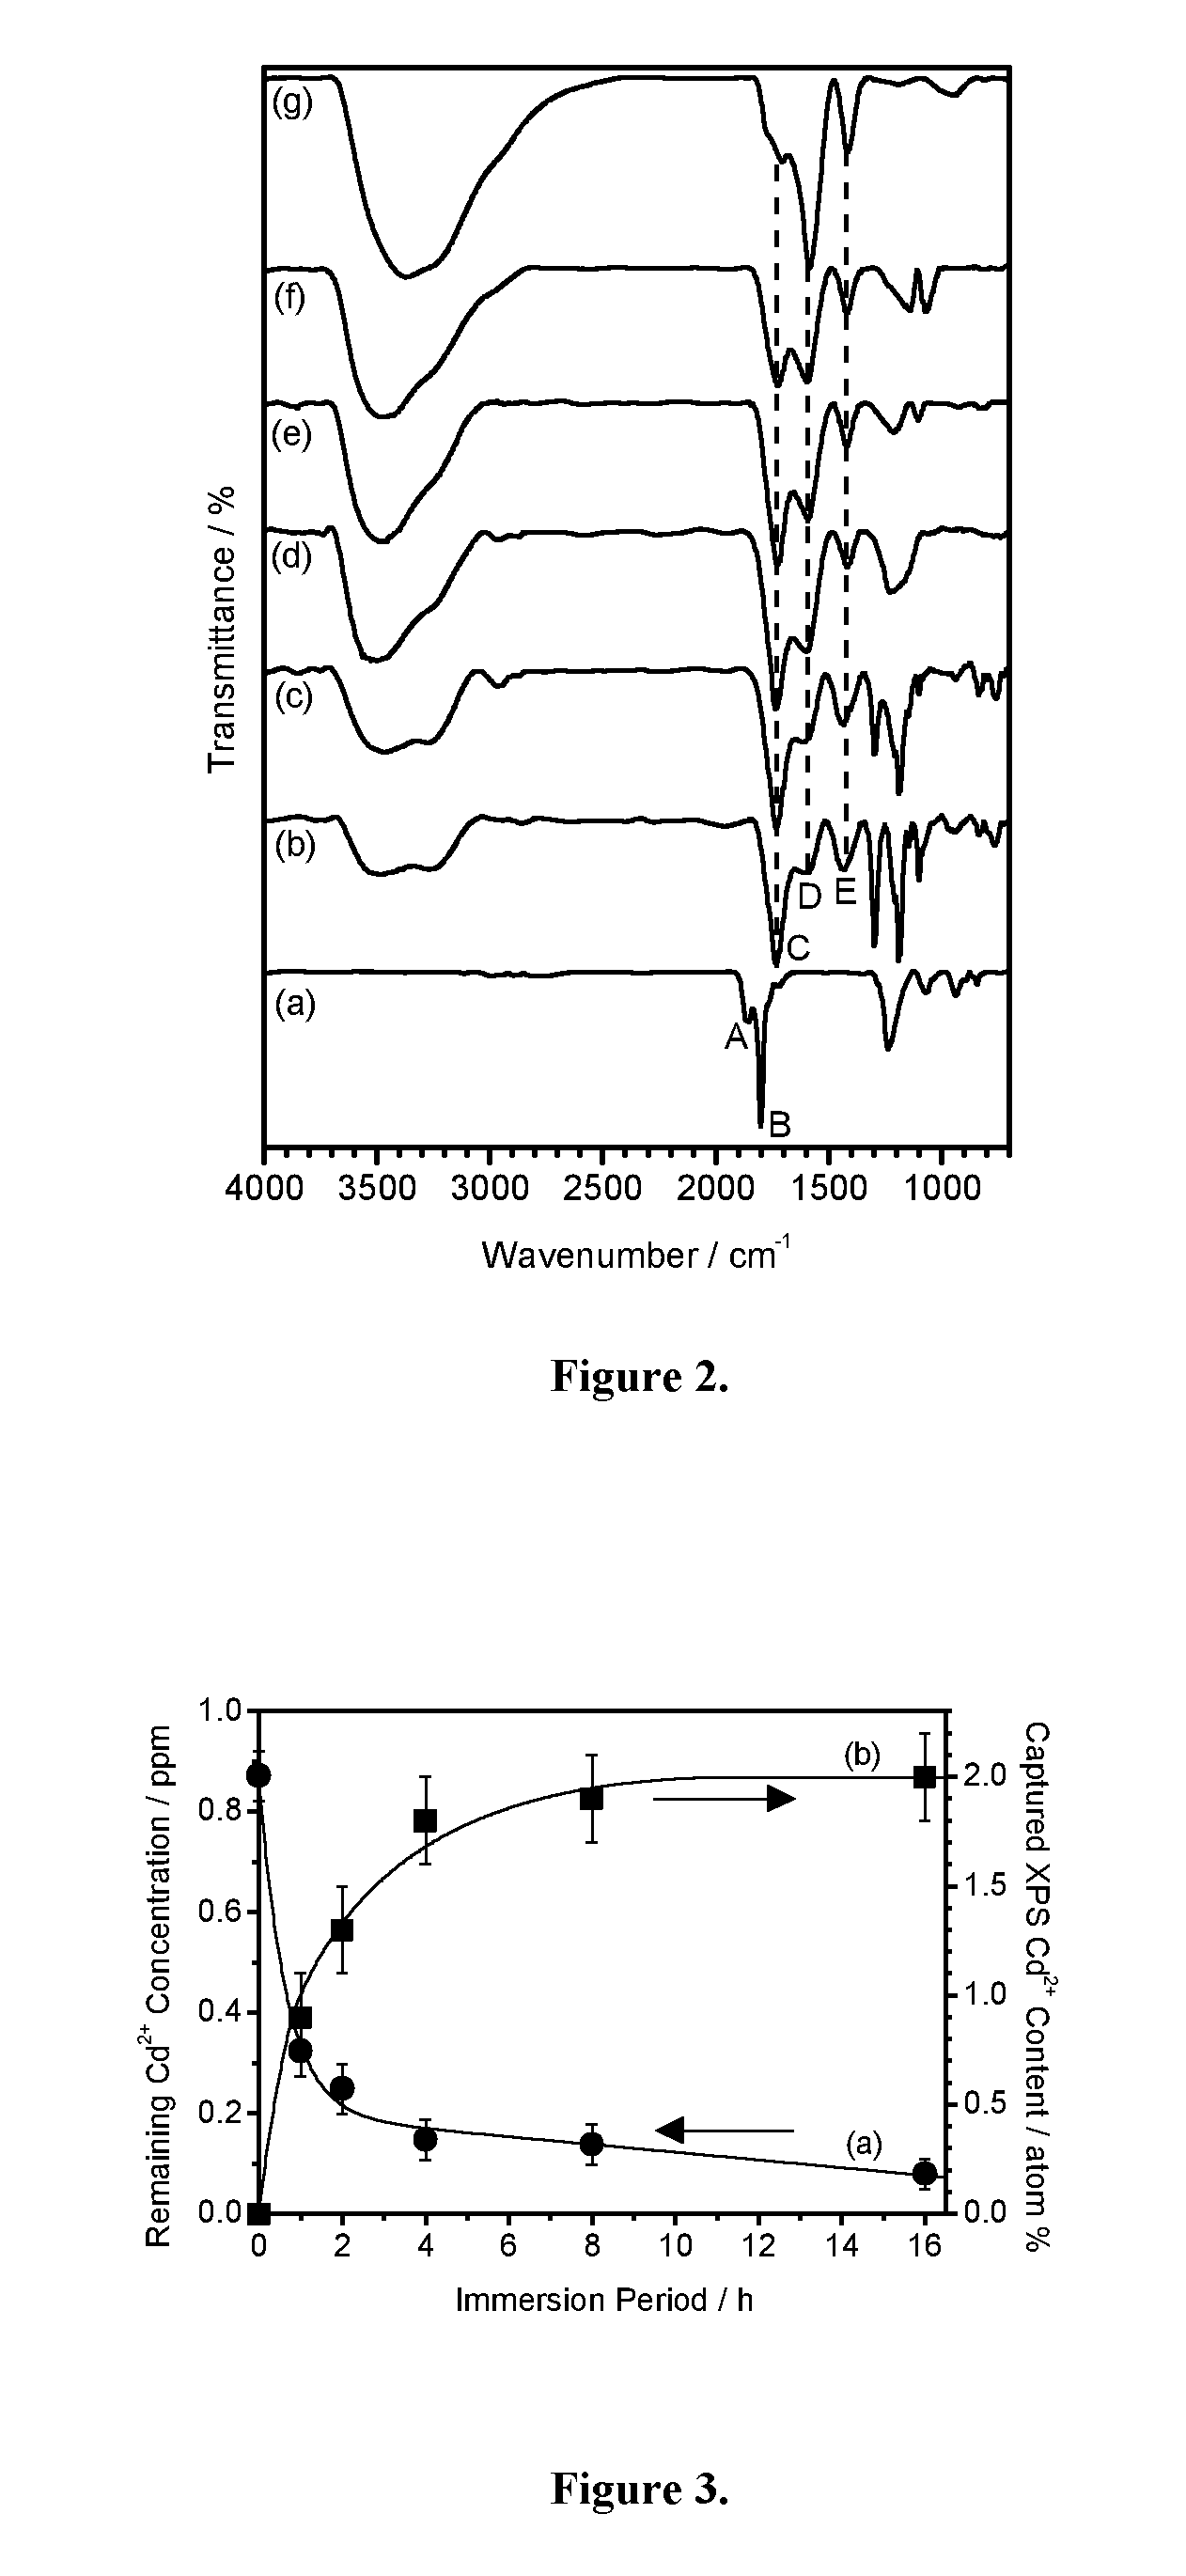 Method of capturing heavy metals by a chemically functionalized surface